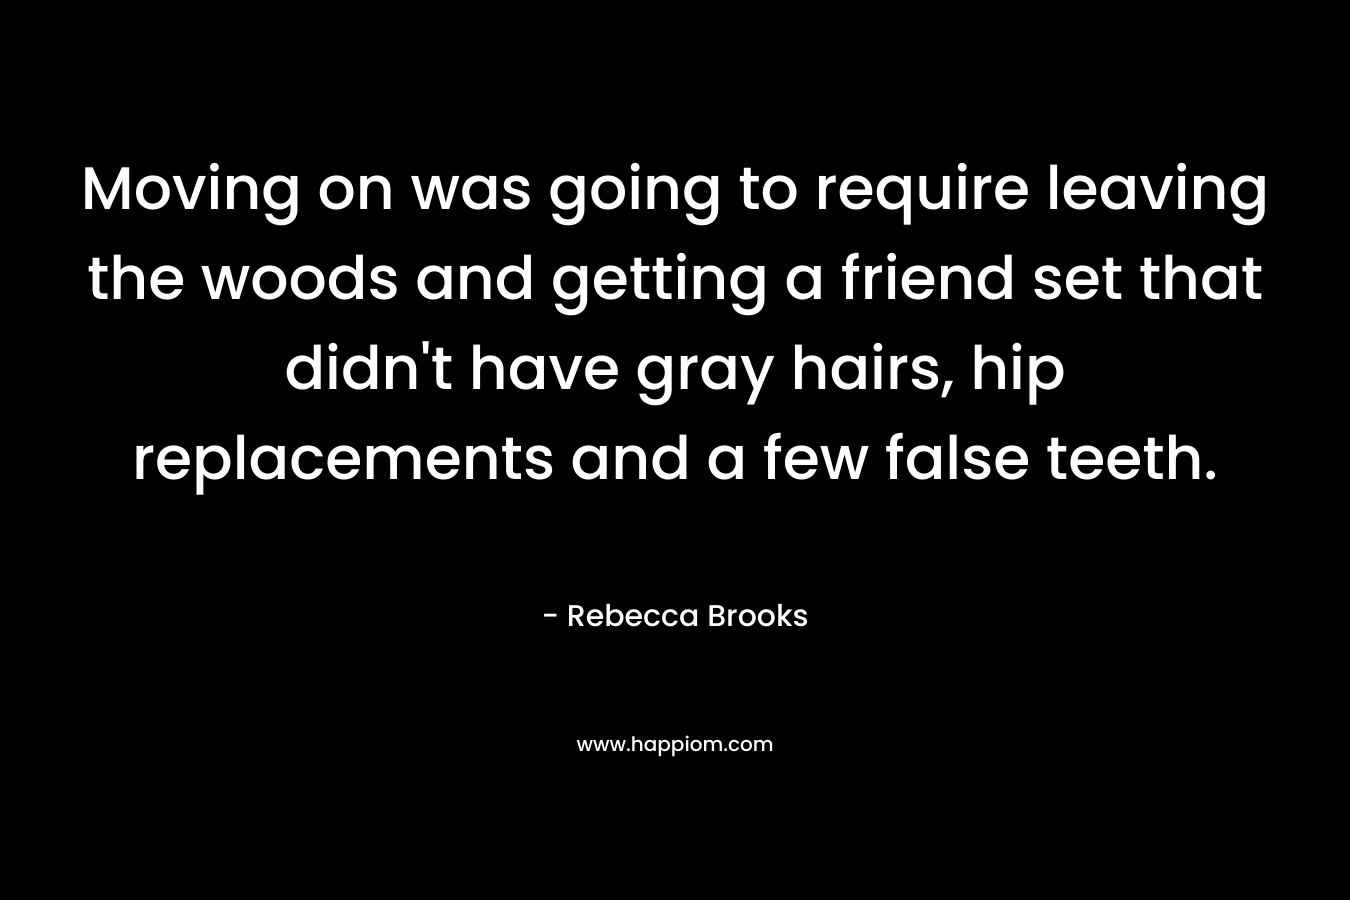 Moving on was going to require leaving the woods and getting a friend set that didn’t have gray hairs, hip replacements and a few false teeth. – Rebecca Brooks